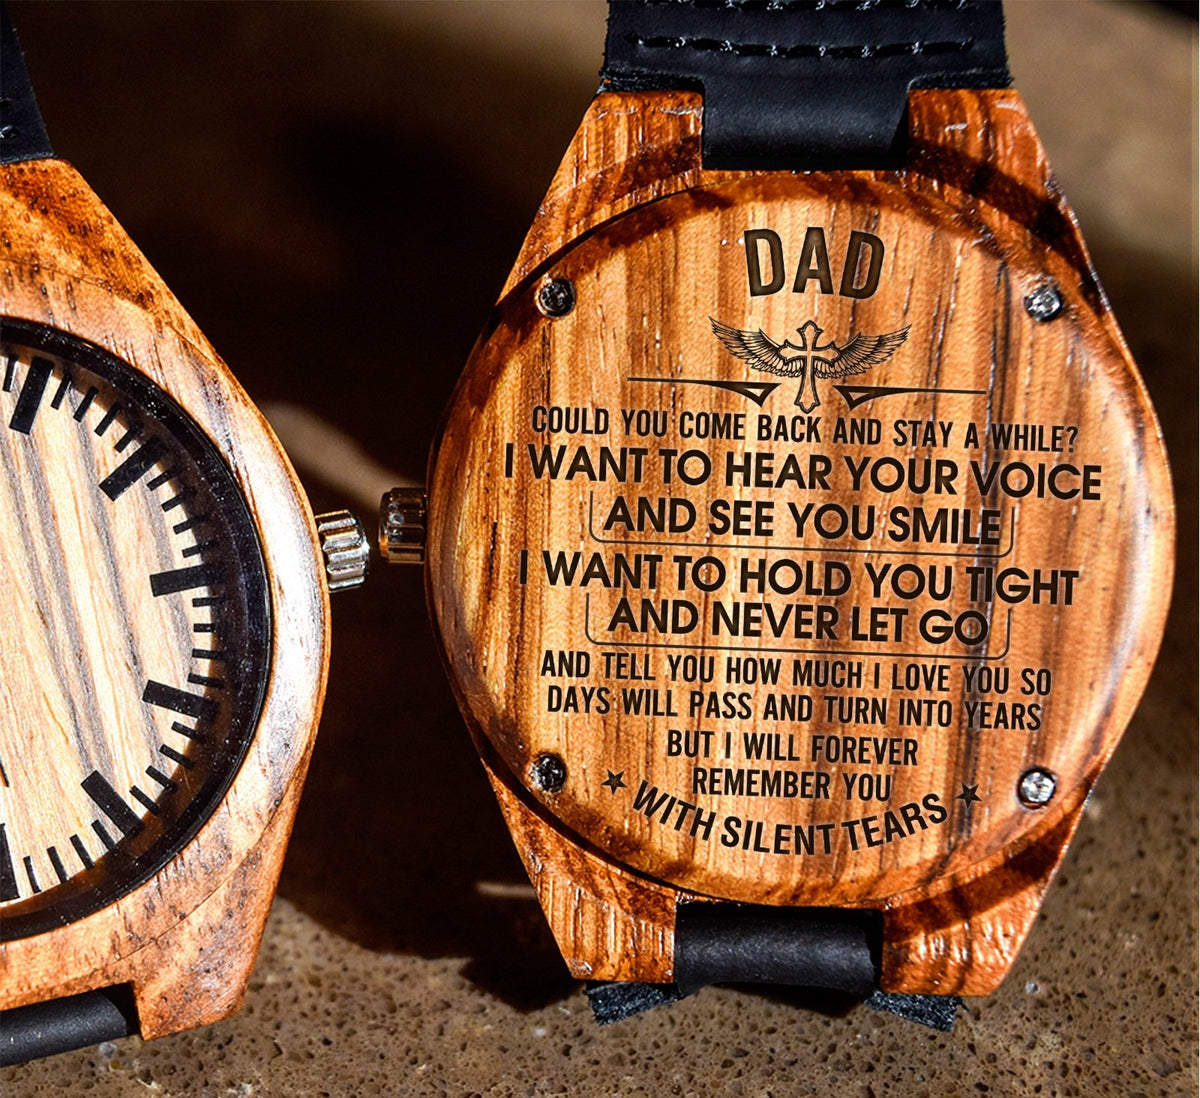 To My Father - I Want to Hear Your Voice and See Your Smile - Wooden Watch